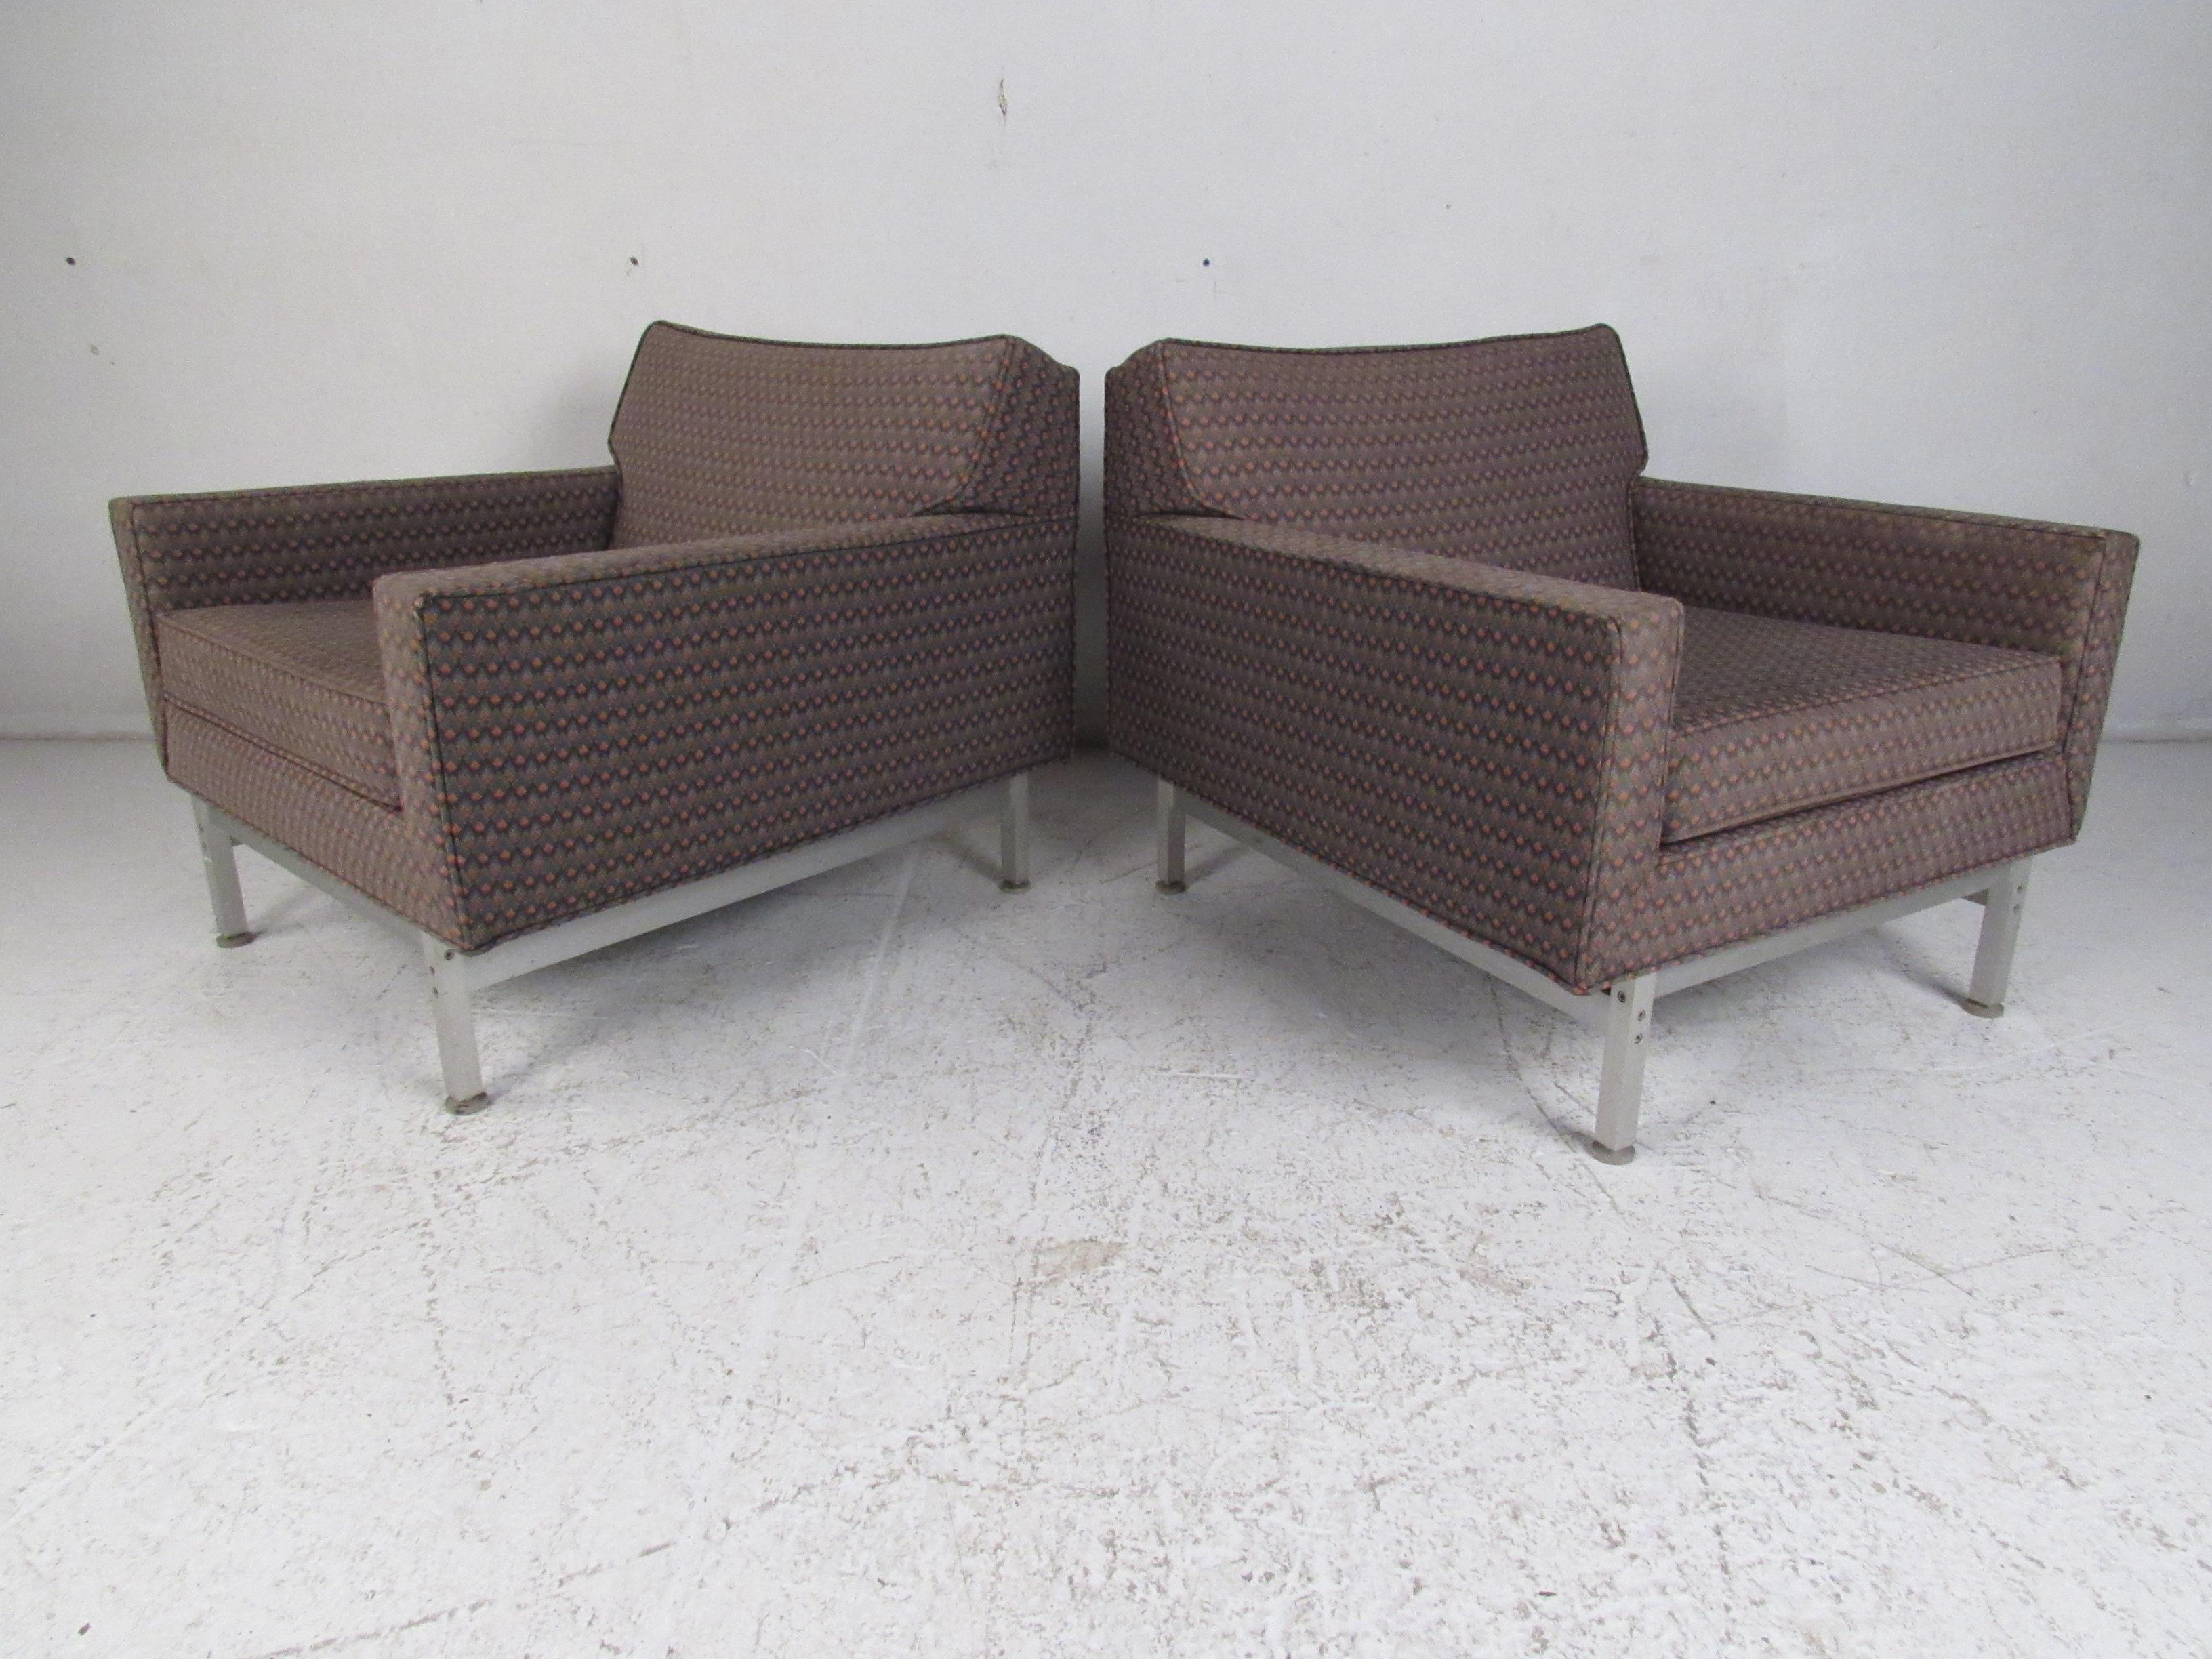 Pair of Mid-Century Modern Knoll Armchairs In Good Condition For Sale In Brooklyn, NY